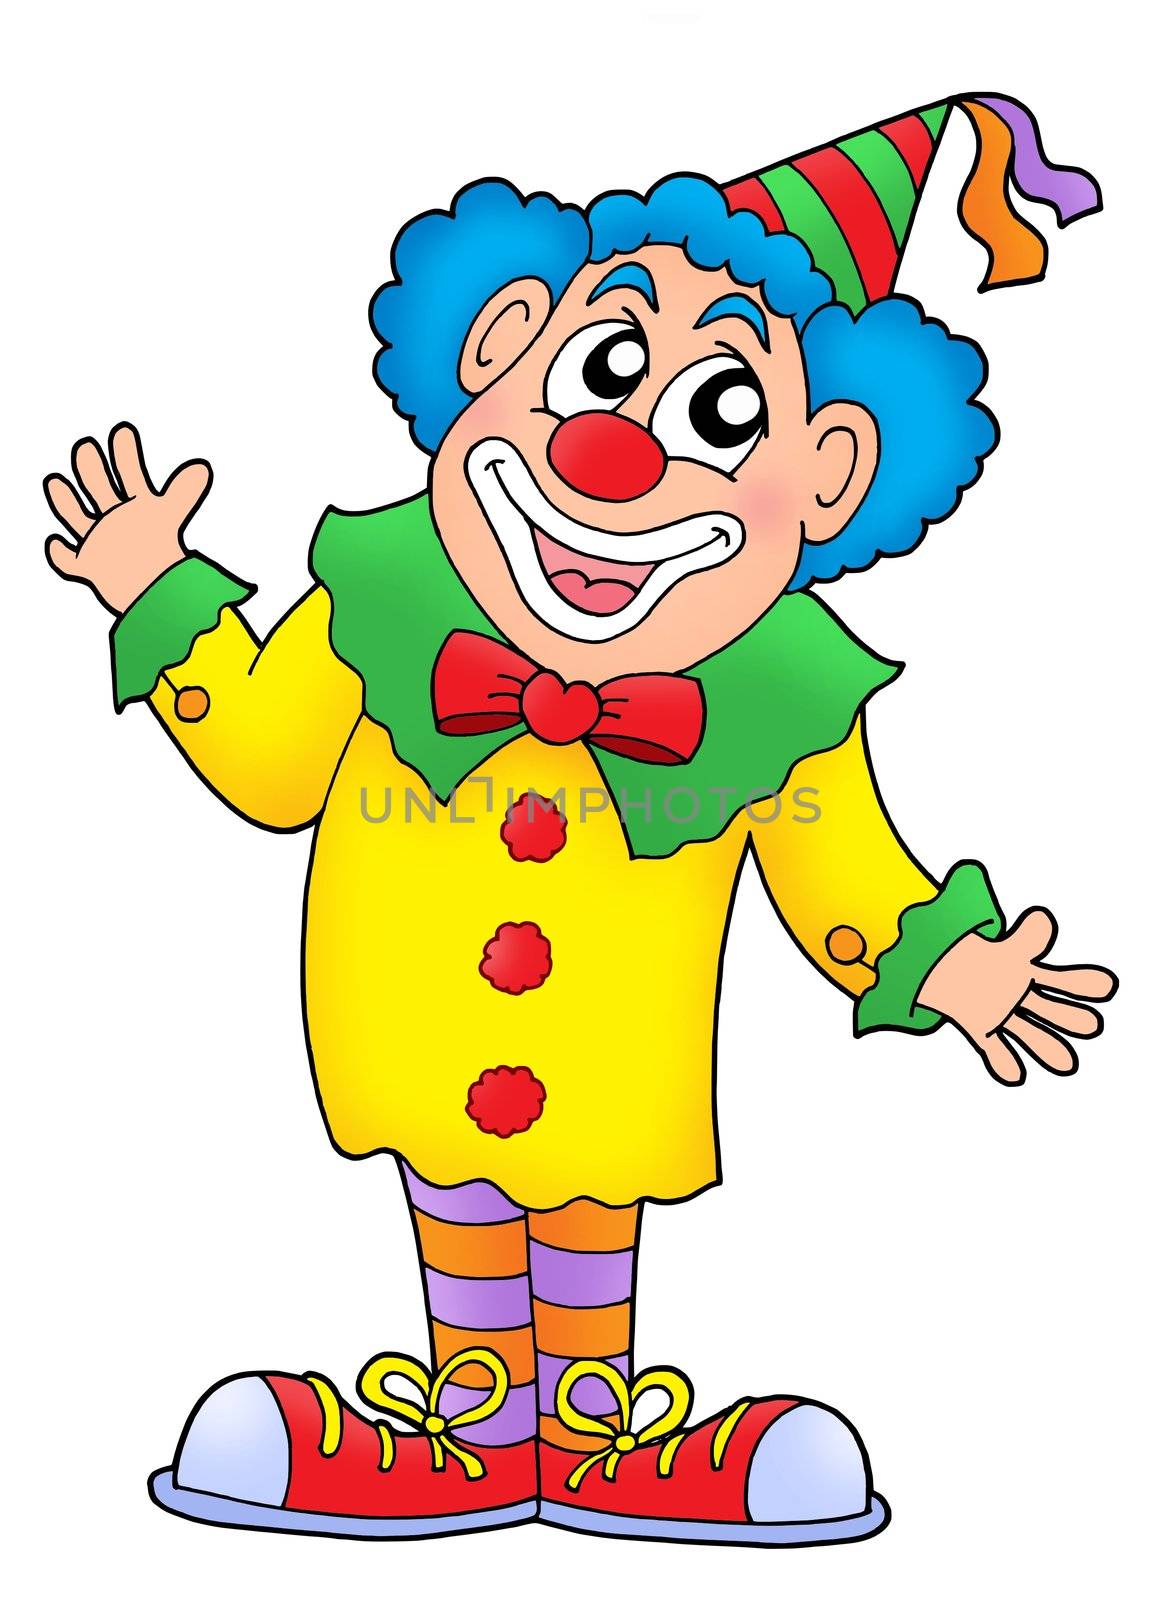 Clown in colorful outfit - color illustration.